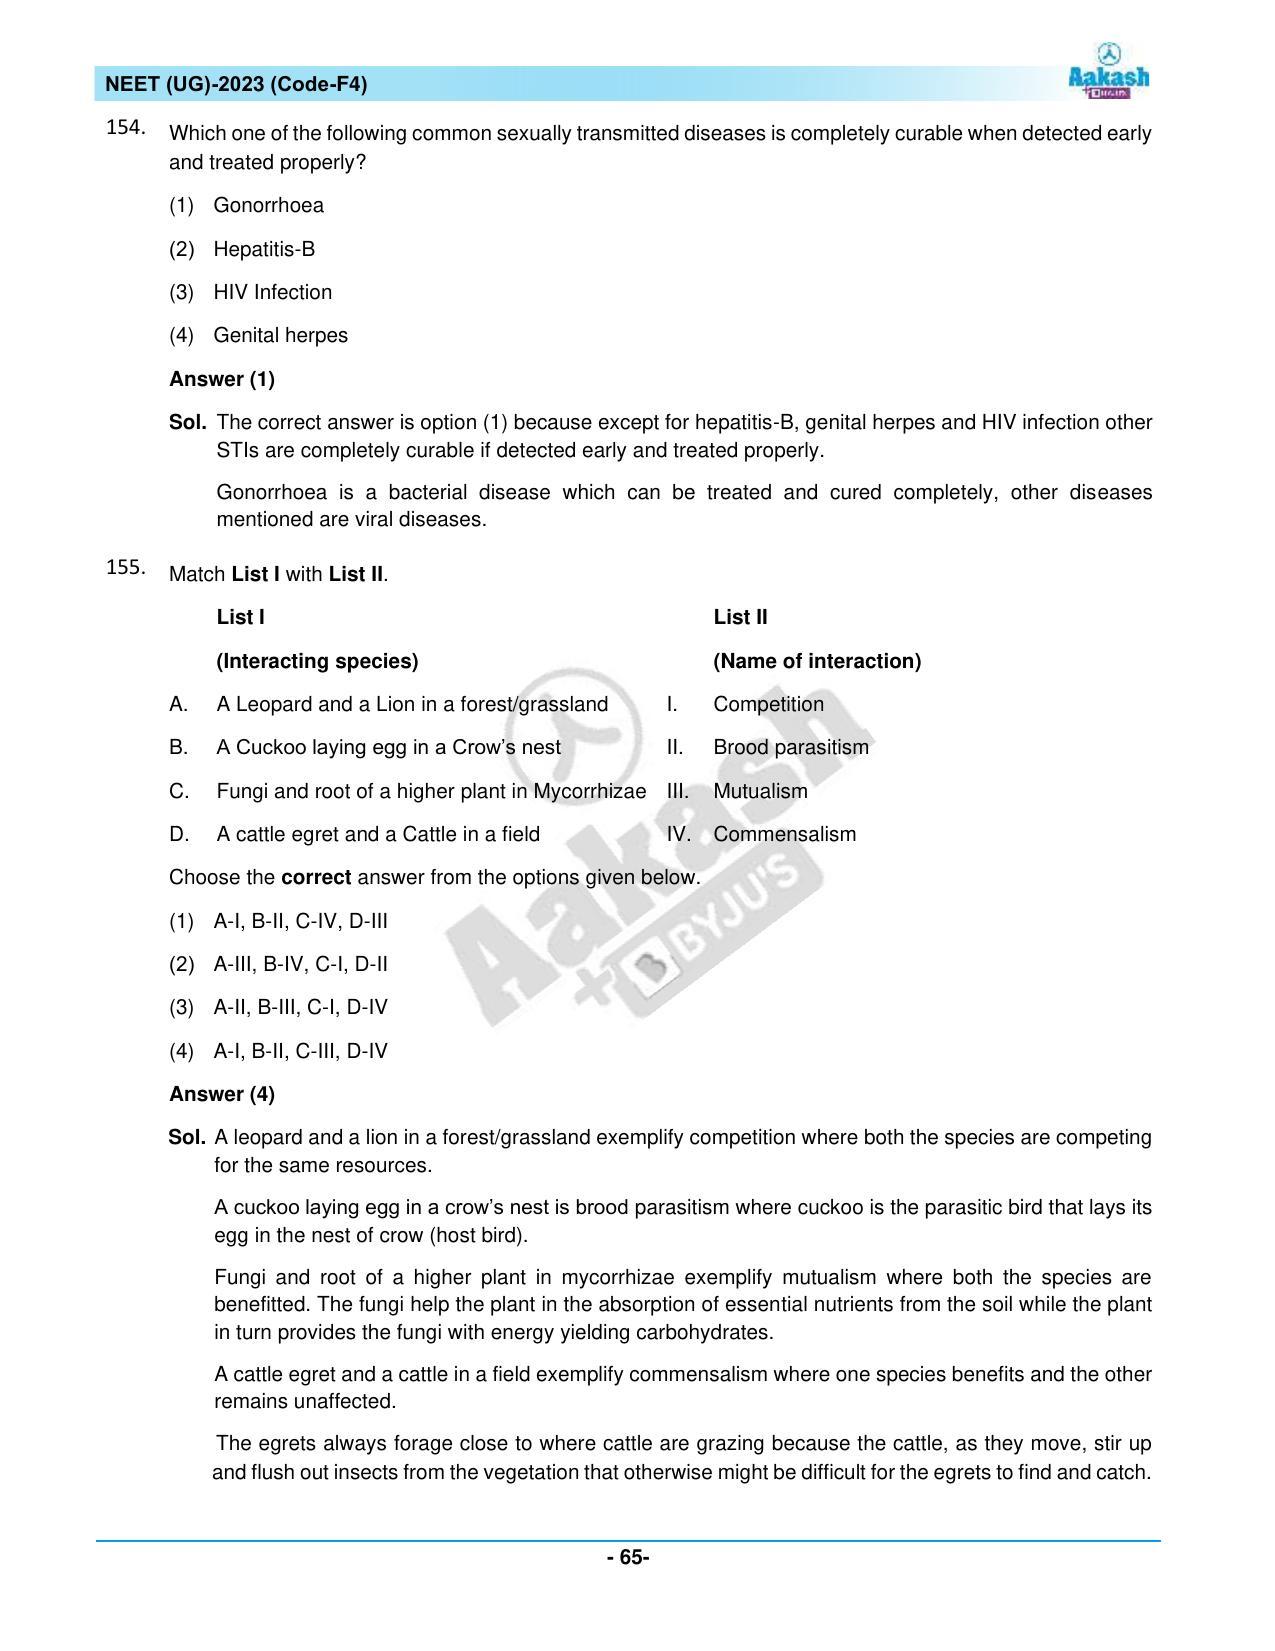 NEET 2023 Question Paper F4 - Page 65